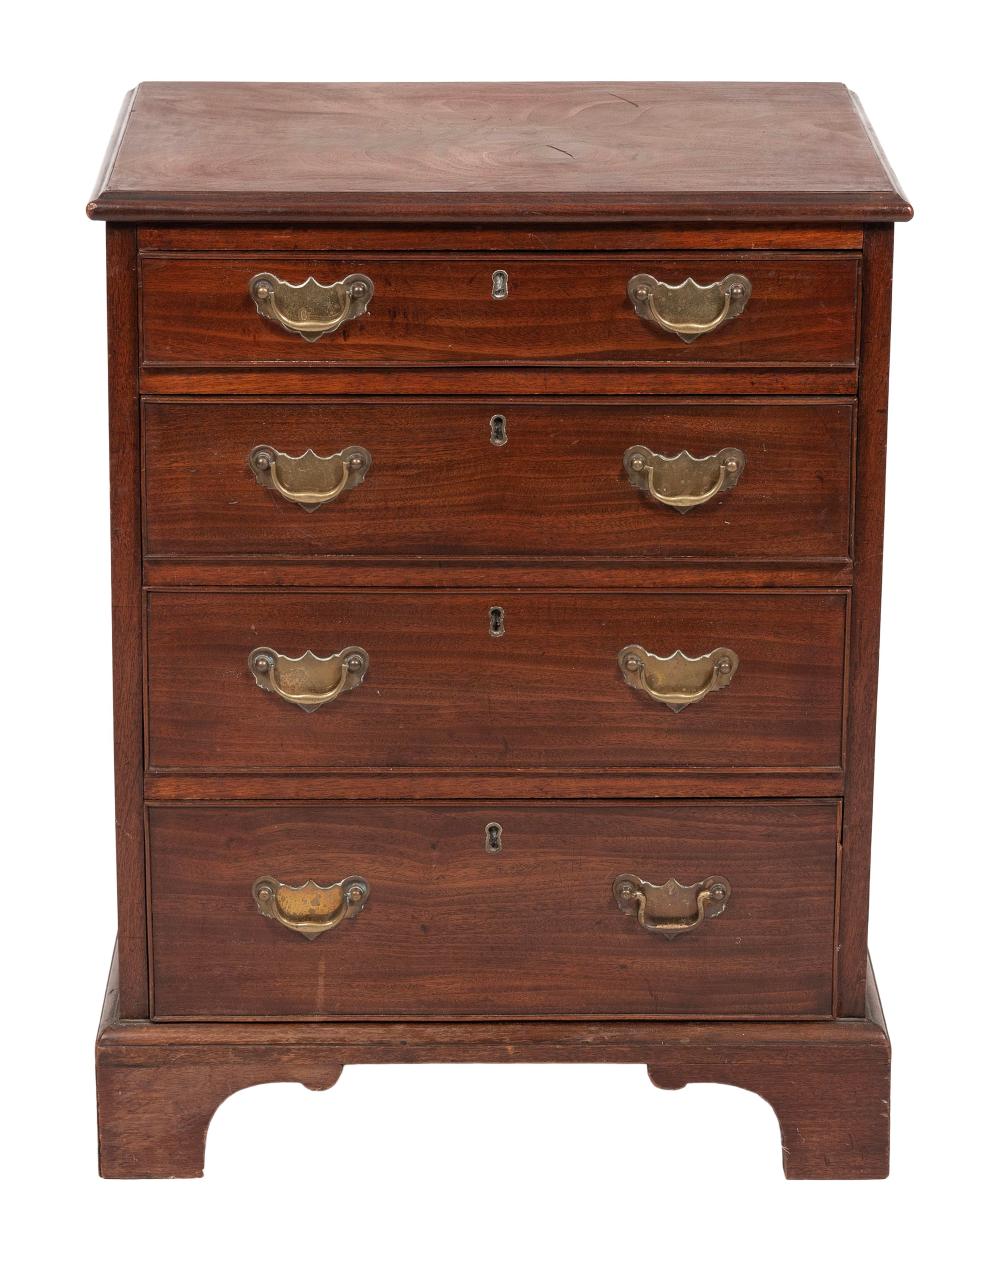 BACHELOR'S CHEST 19TH CENTURY HEIGHT